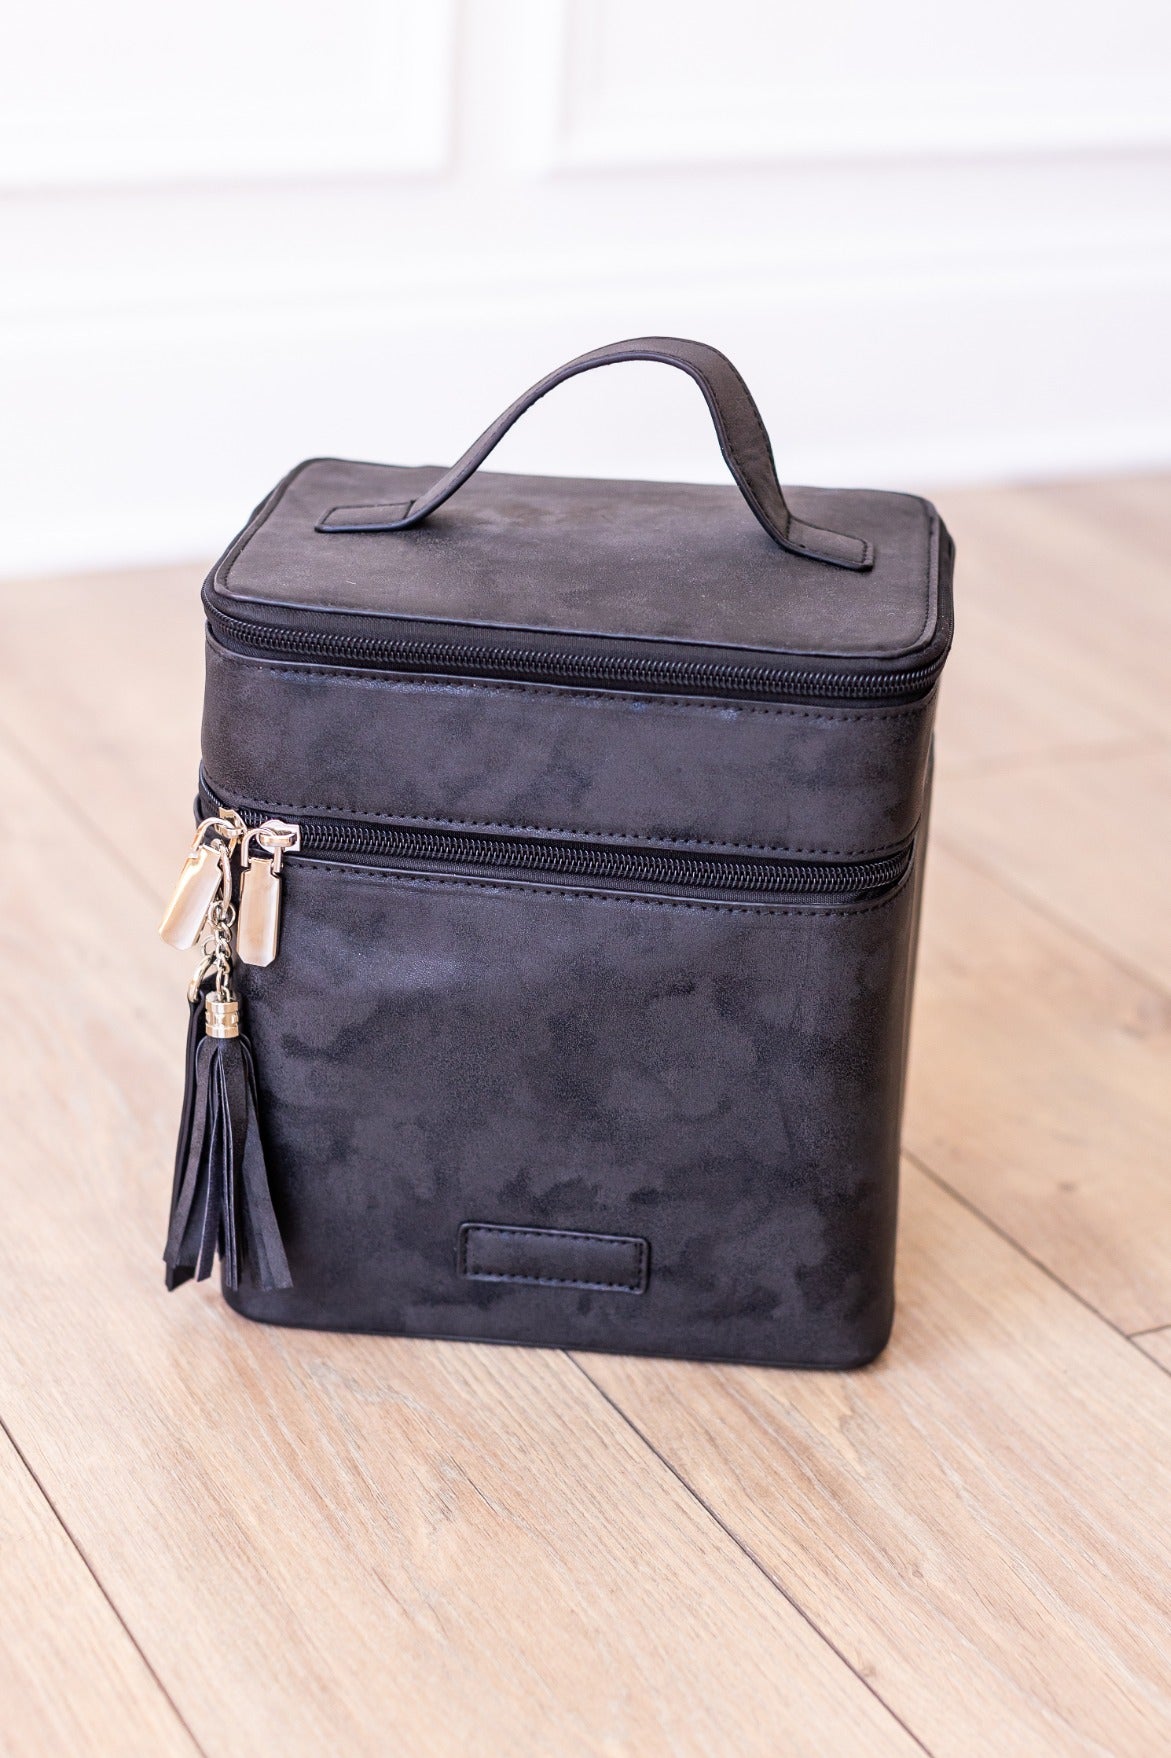 The Delilah Black Leather Duo Vanity Case